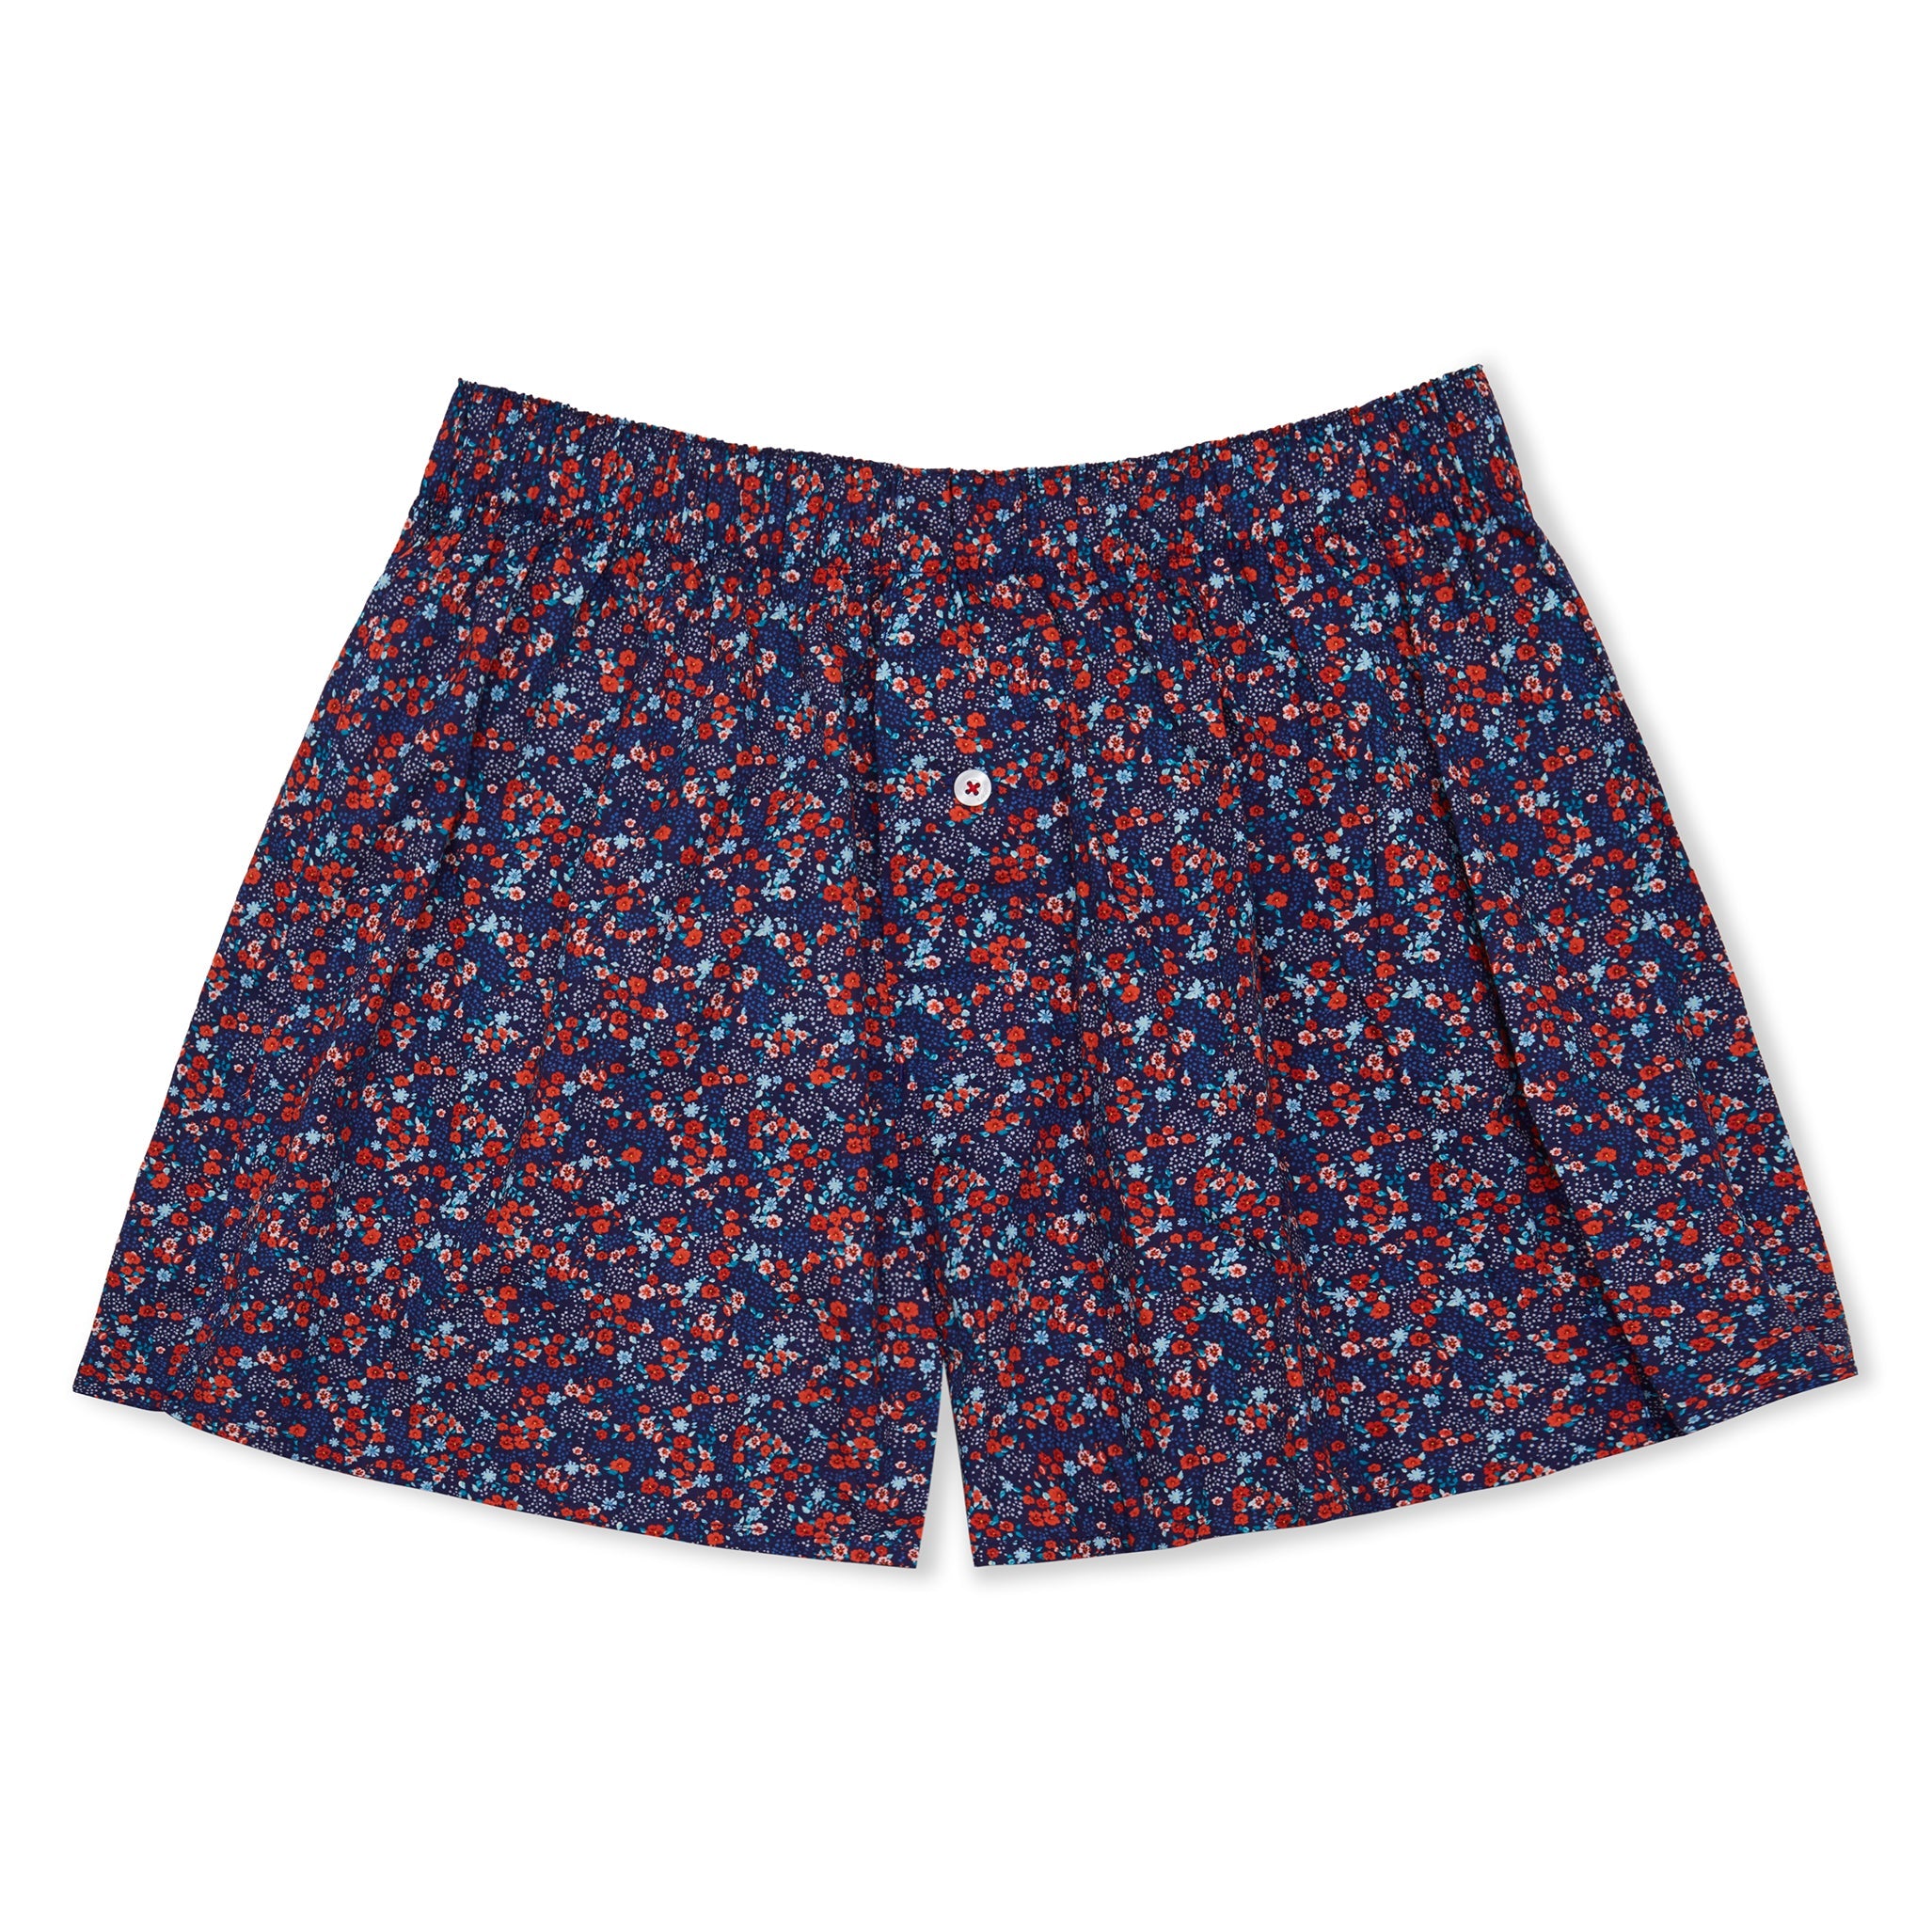 Drutherswear Organic Cotton Micro Floral Boxer Shorts - Navy